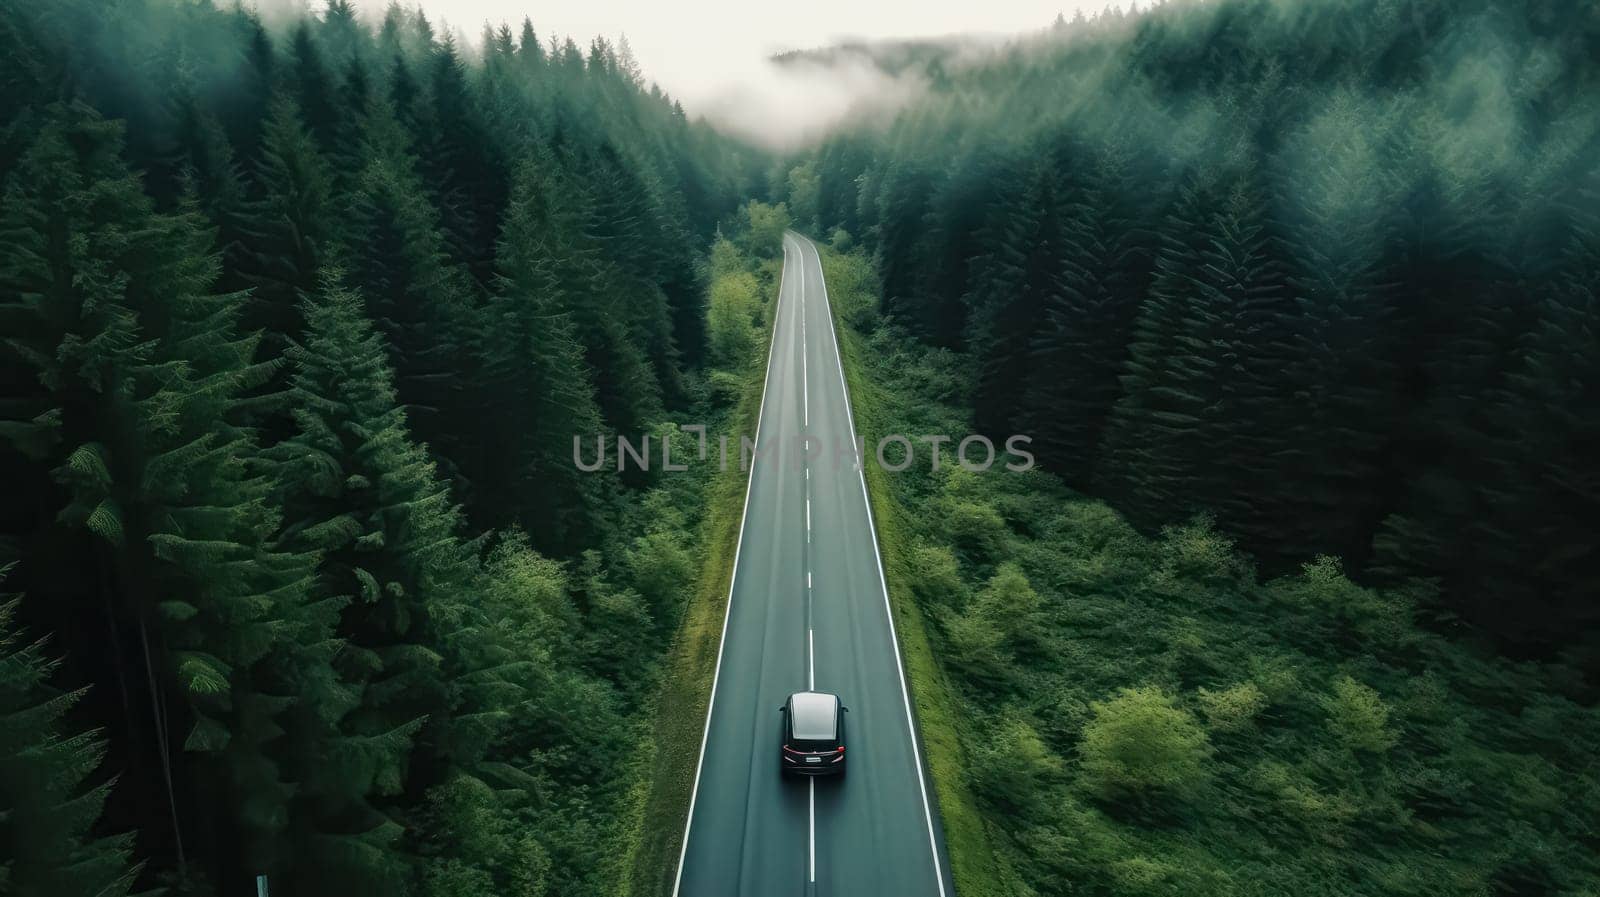 A drone captures a car driving along a highway nestled within a forest, showcasing the tranquility of a scenic drive through nature.